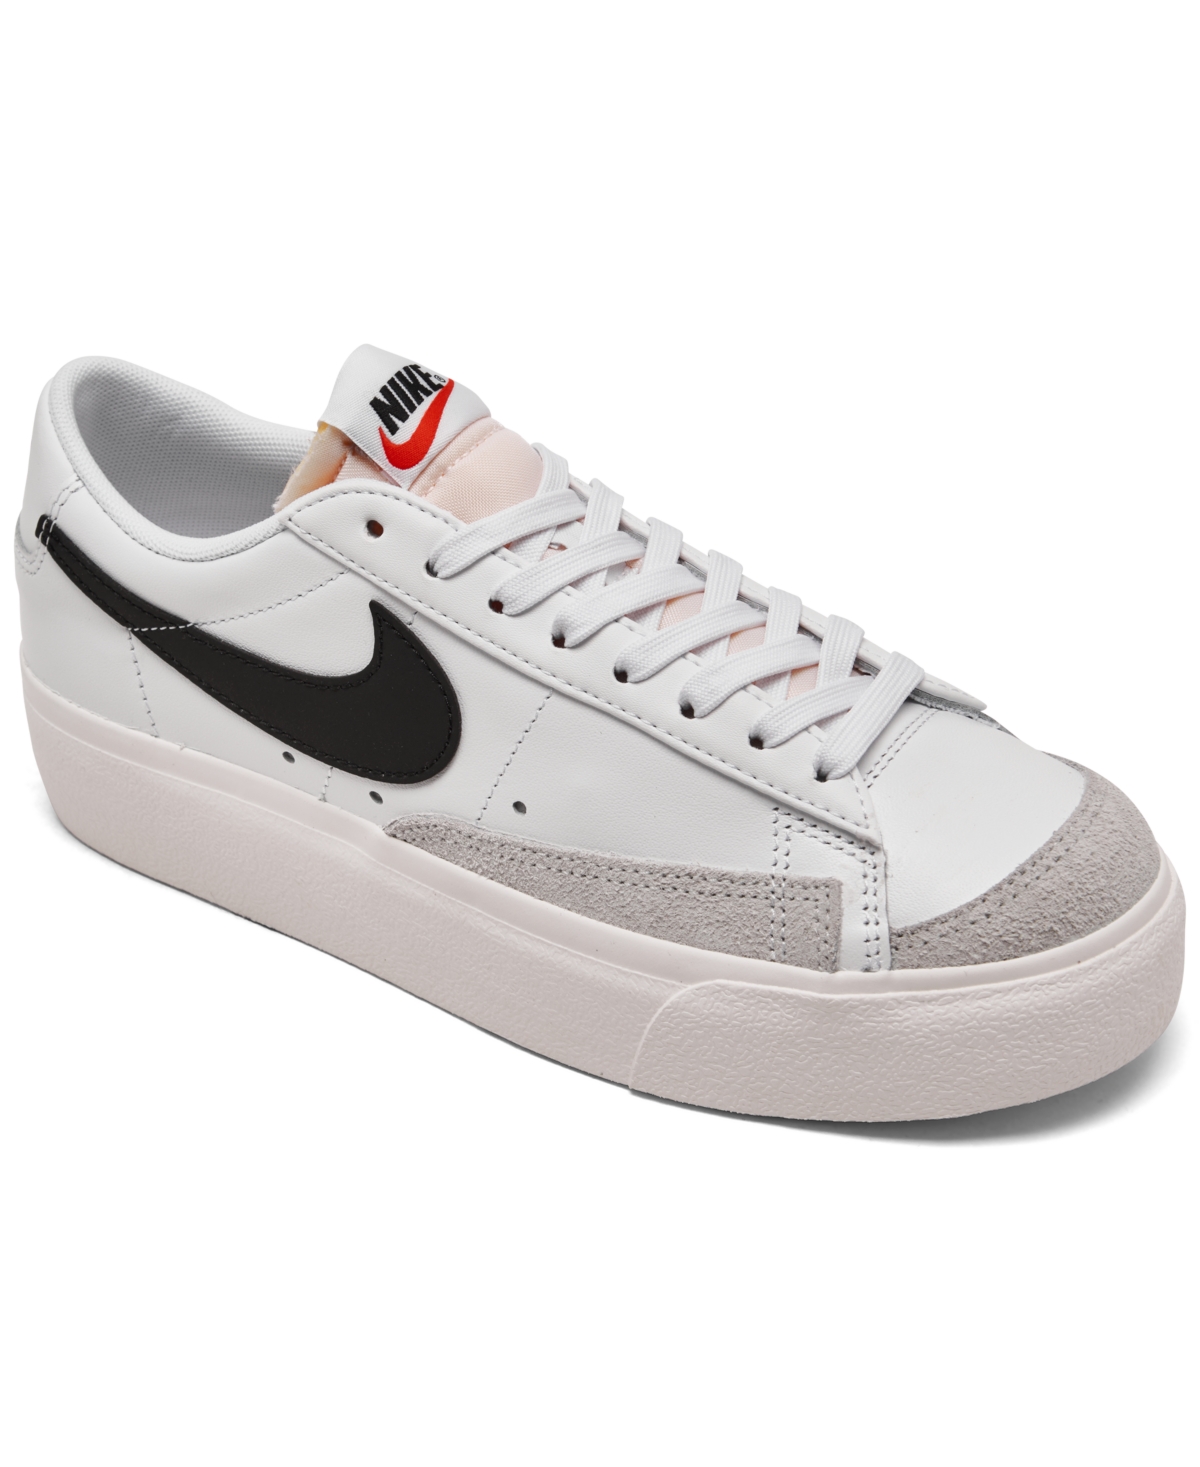 Women's Blazer Low Platform Casual Sneakers from Finish Line - White, Black